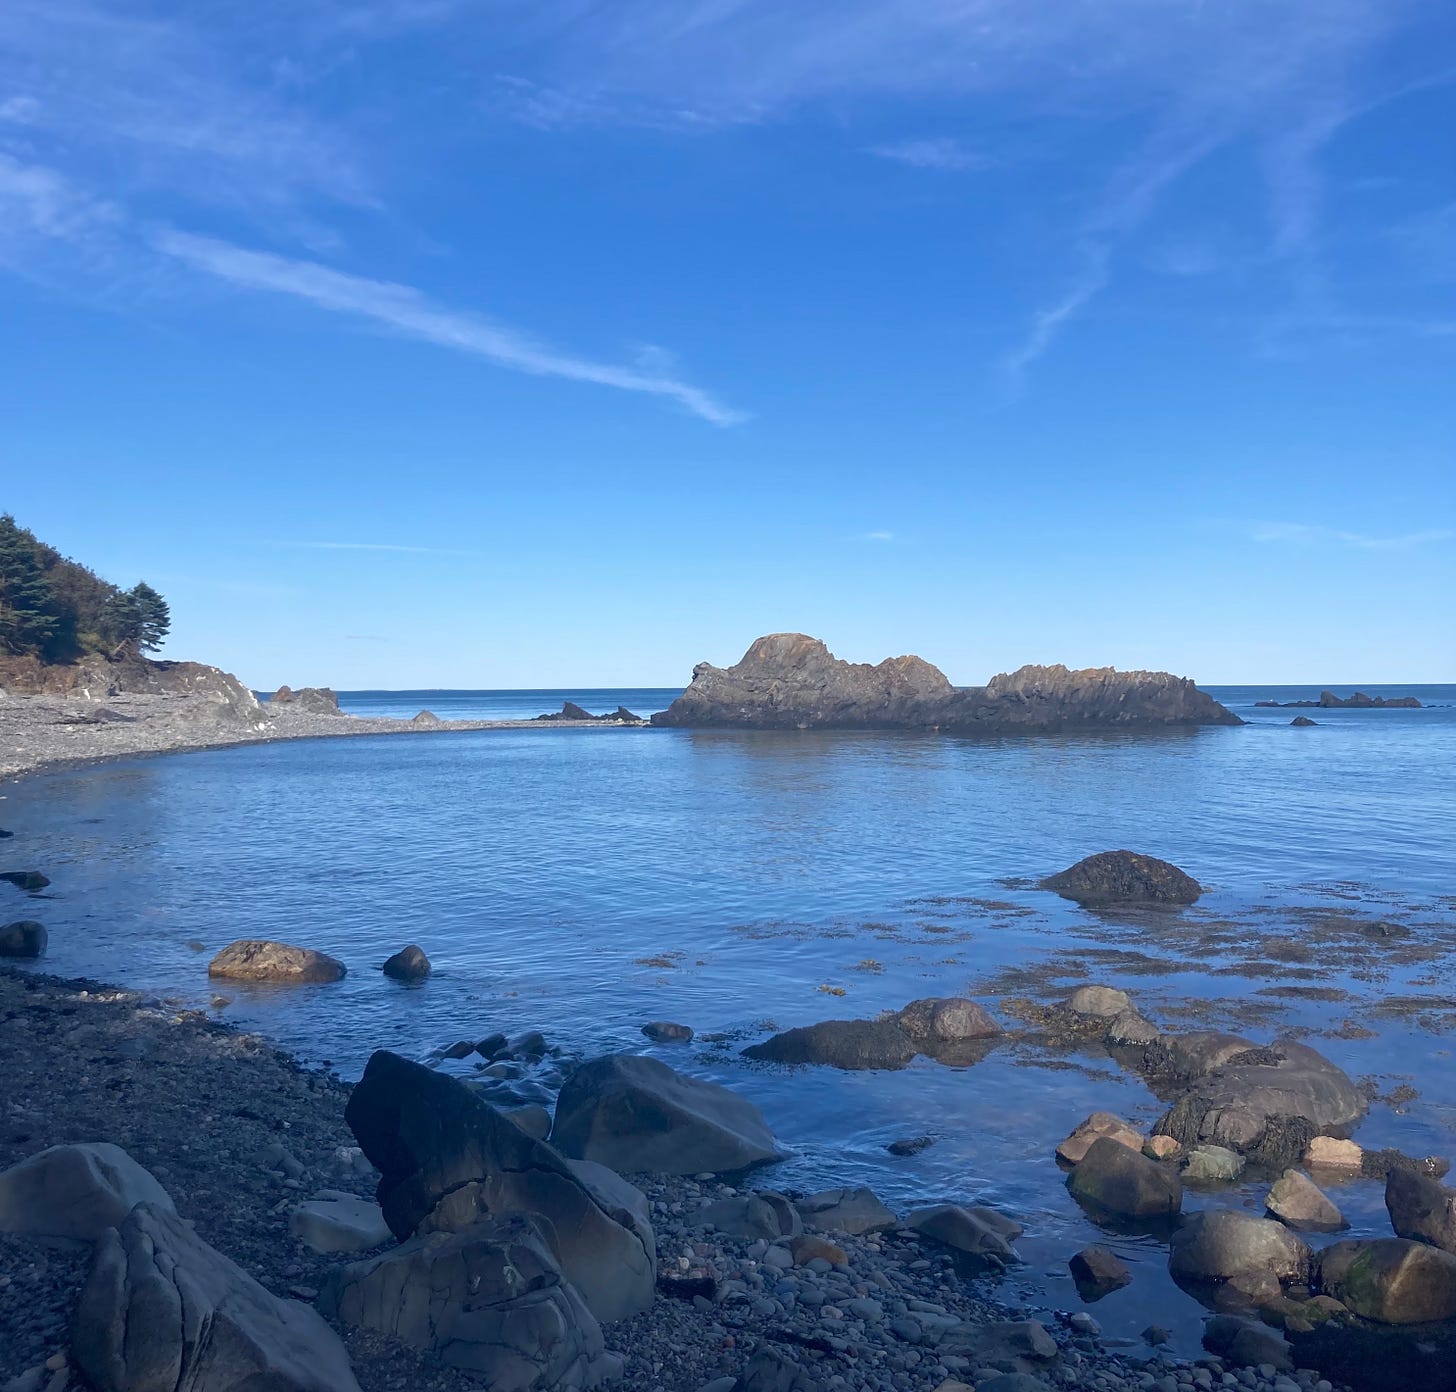 A rocky cove with blue water and blue sky